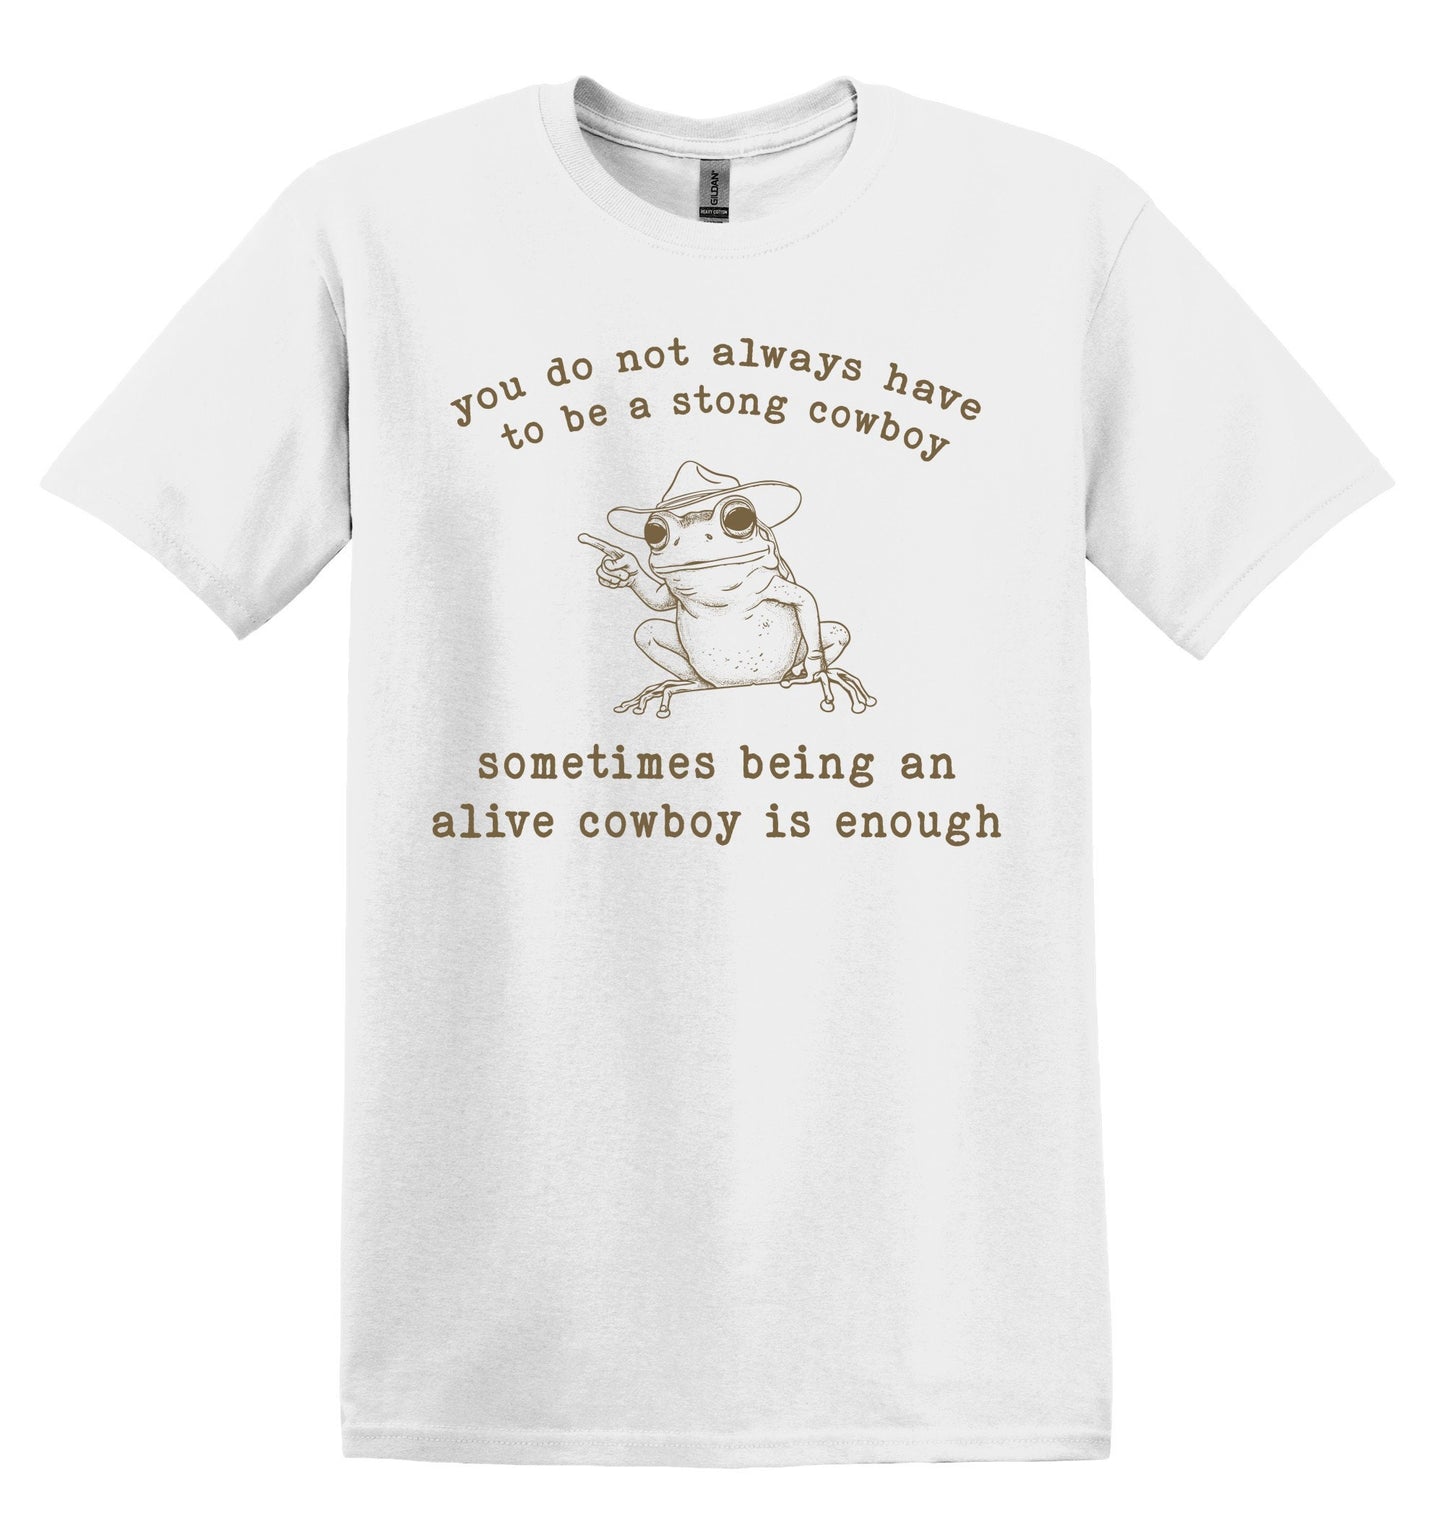 You Do Not Always Have to Be Strong Cowboy Shirt Graphic Shirt Funny Shirt Vintage Funny TShirt Nostalgia T-Shirt Relaxed Cotton Shirt